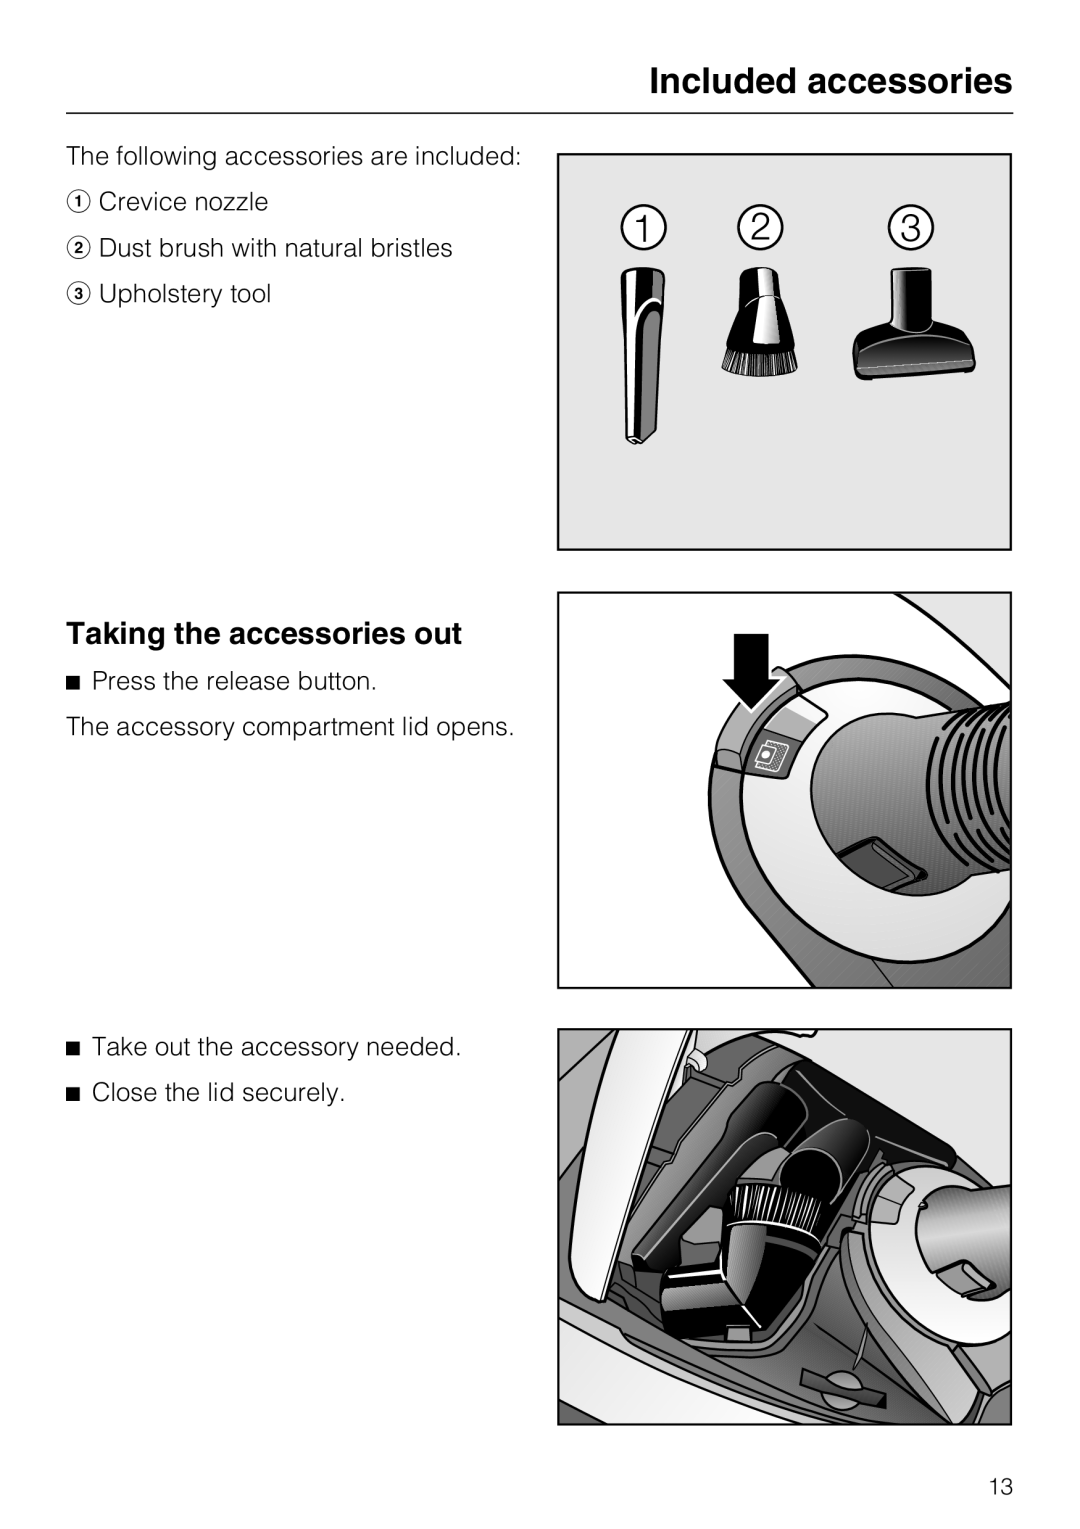 Miele S 5001 manual Included accessories, Taking the accessories out 